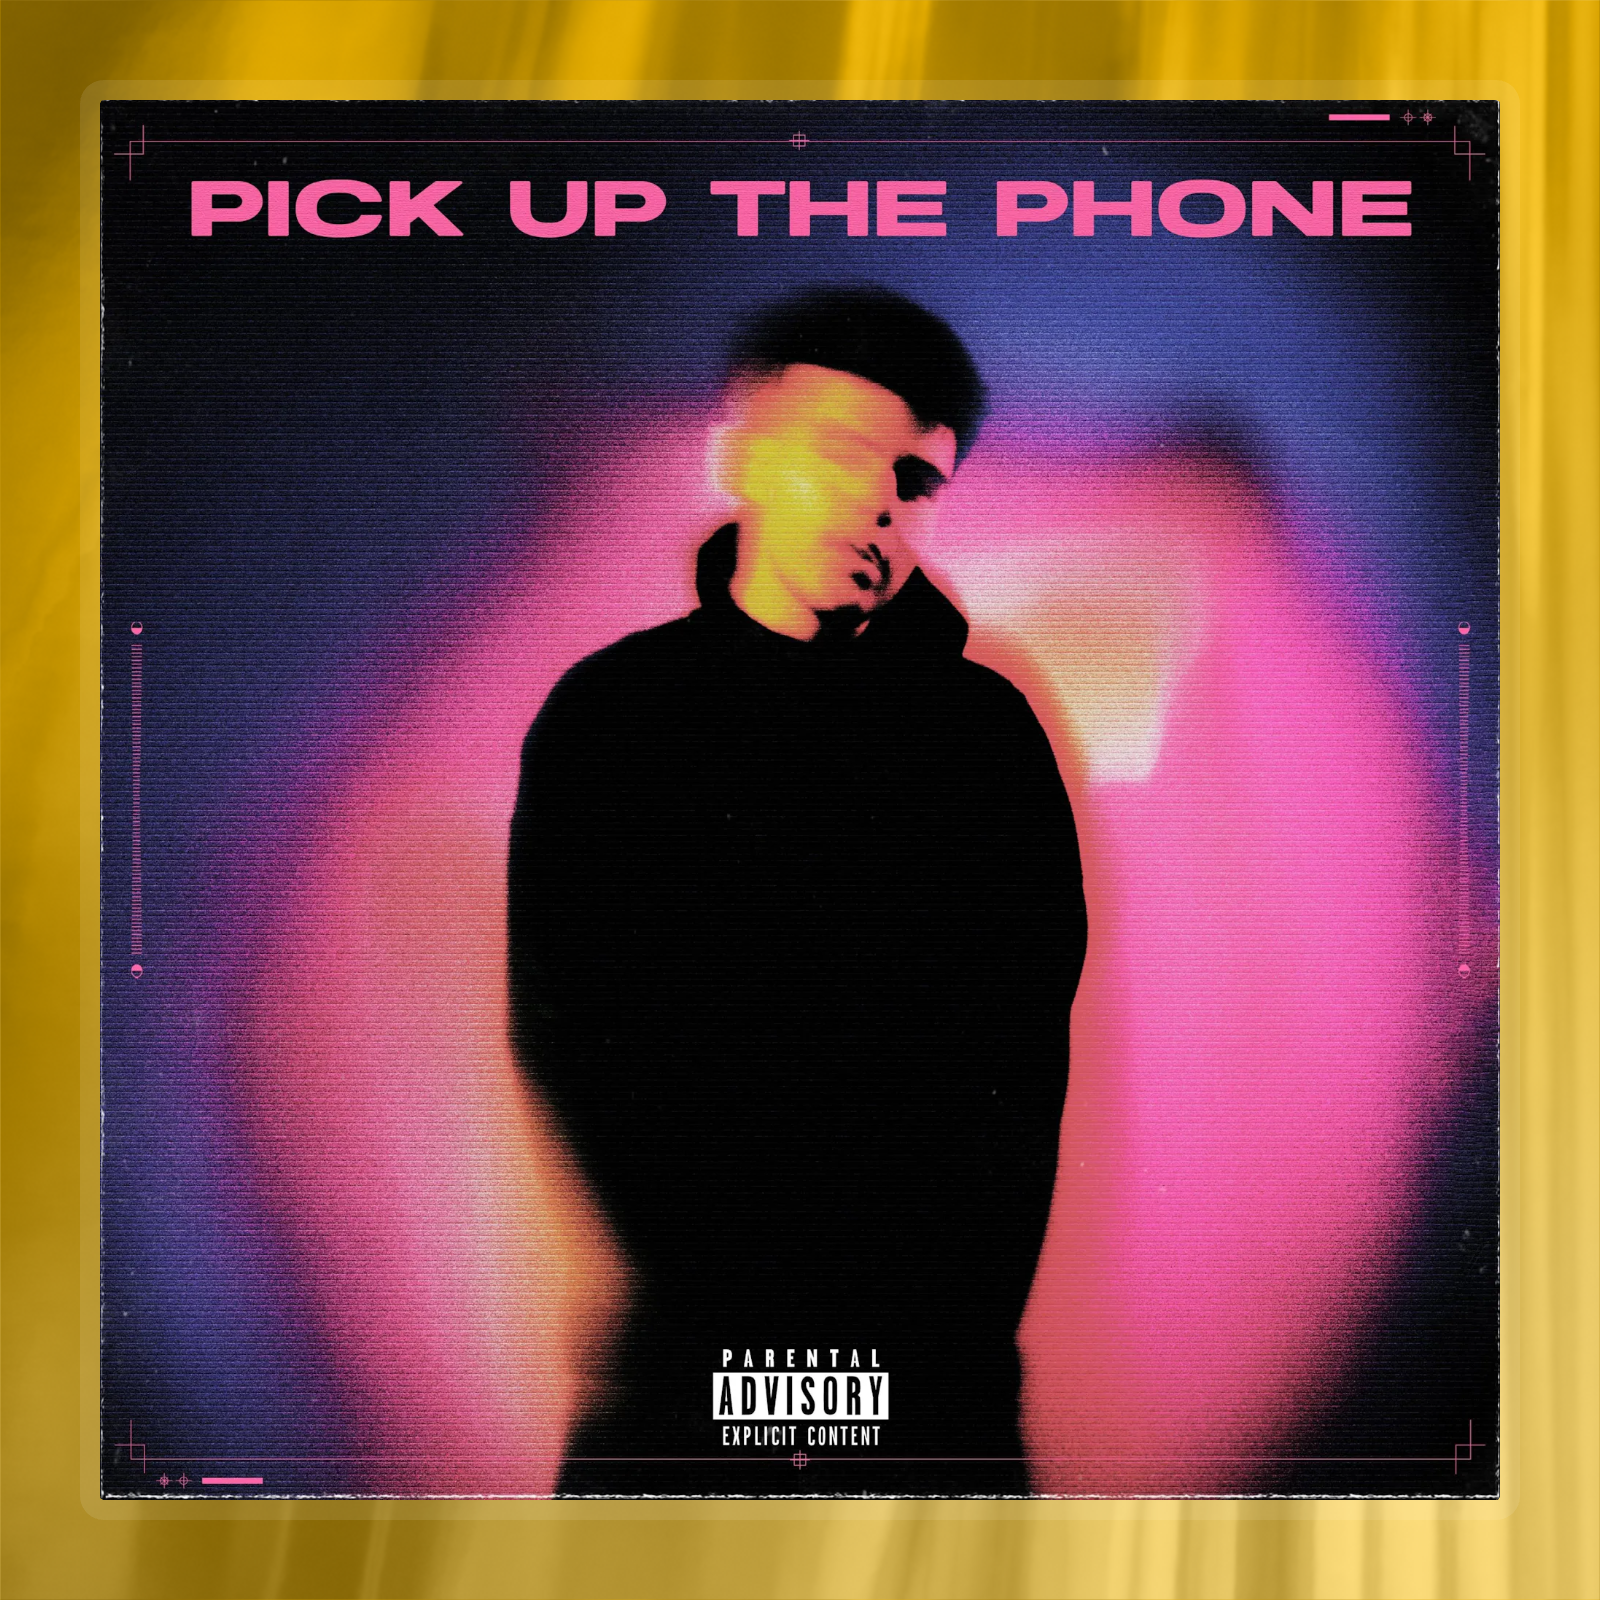 PICK UP THE PHONE